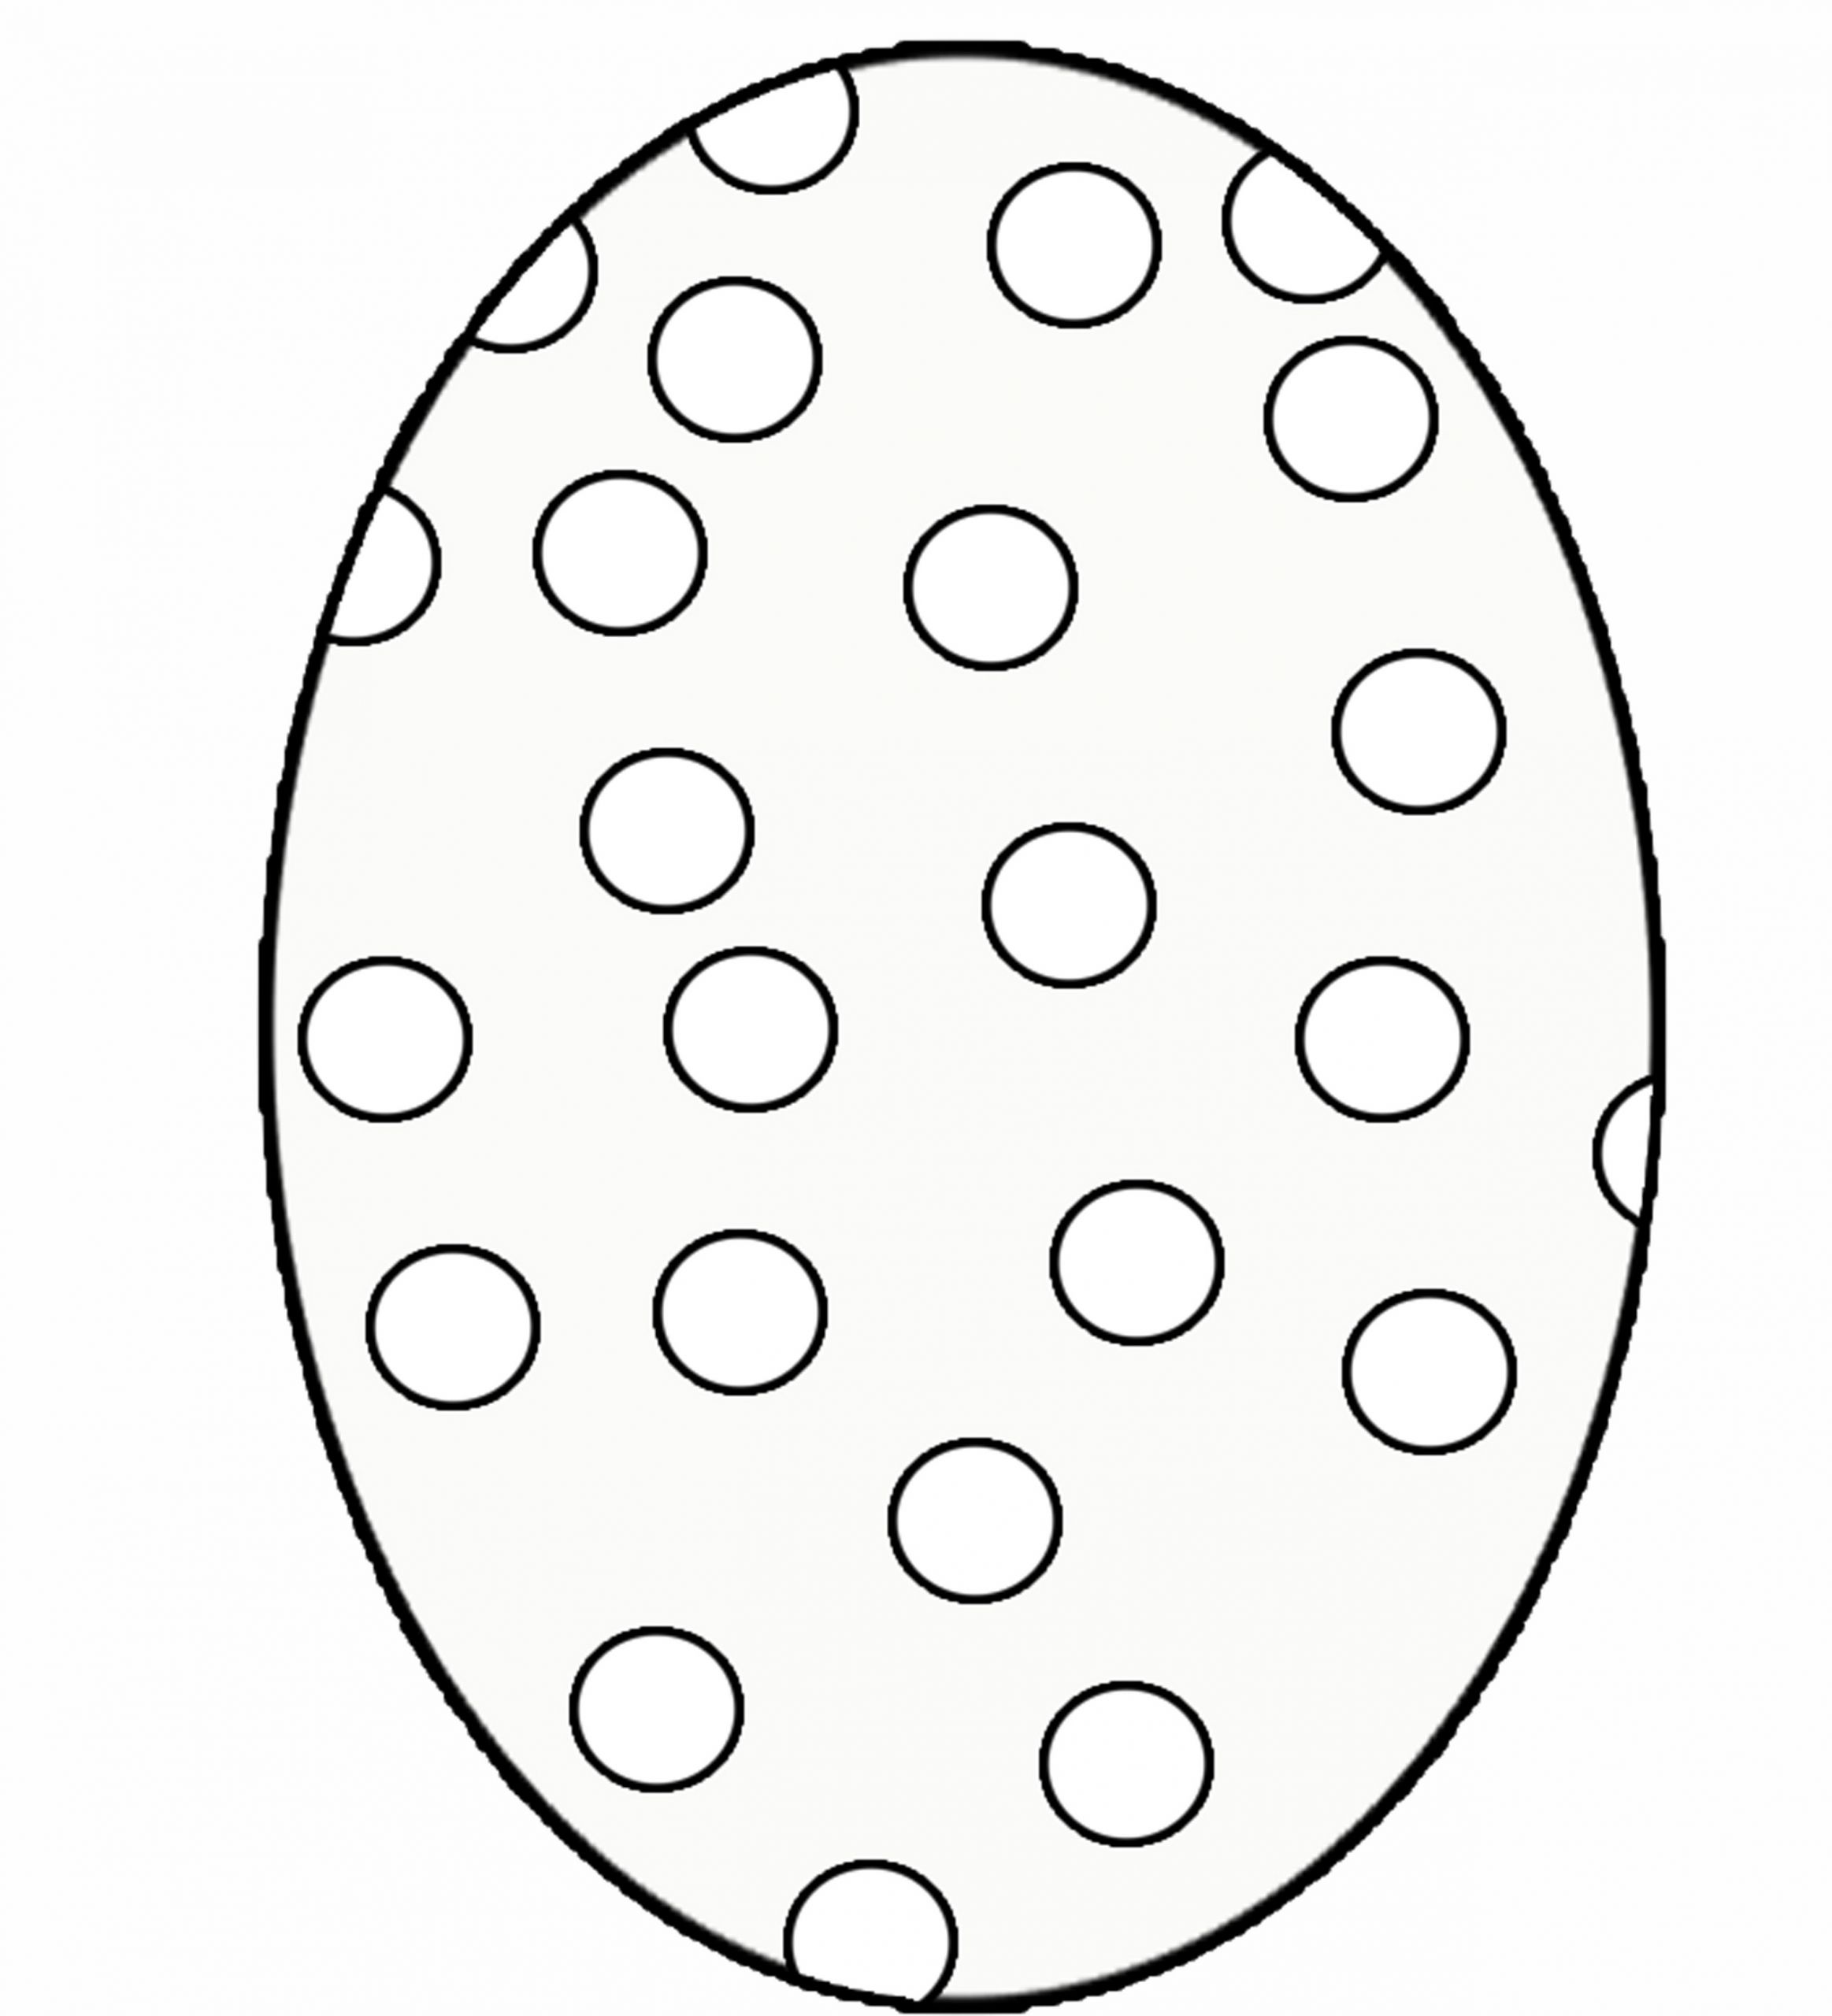 Printable Easter Egg Coloring Pages
 Coloring Pages